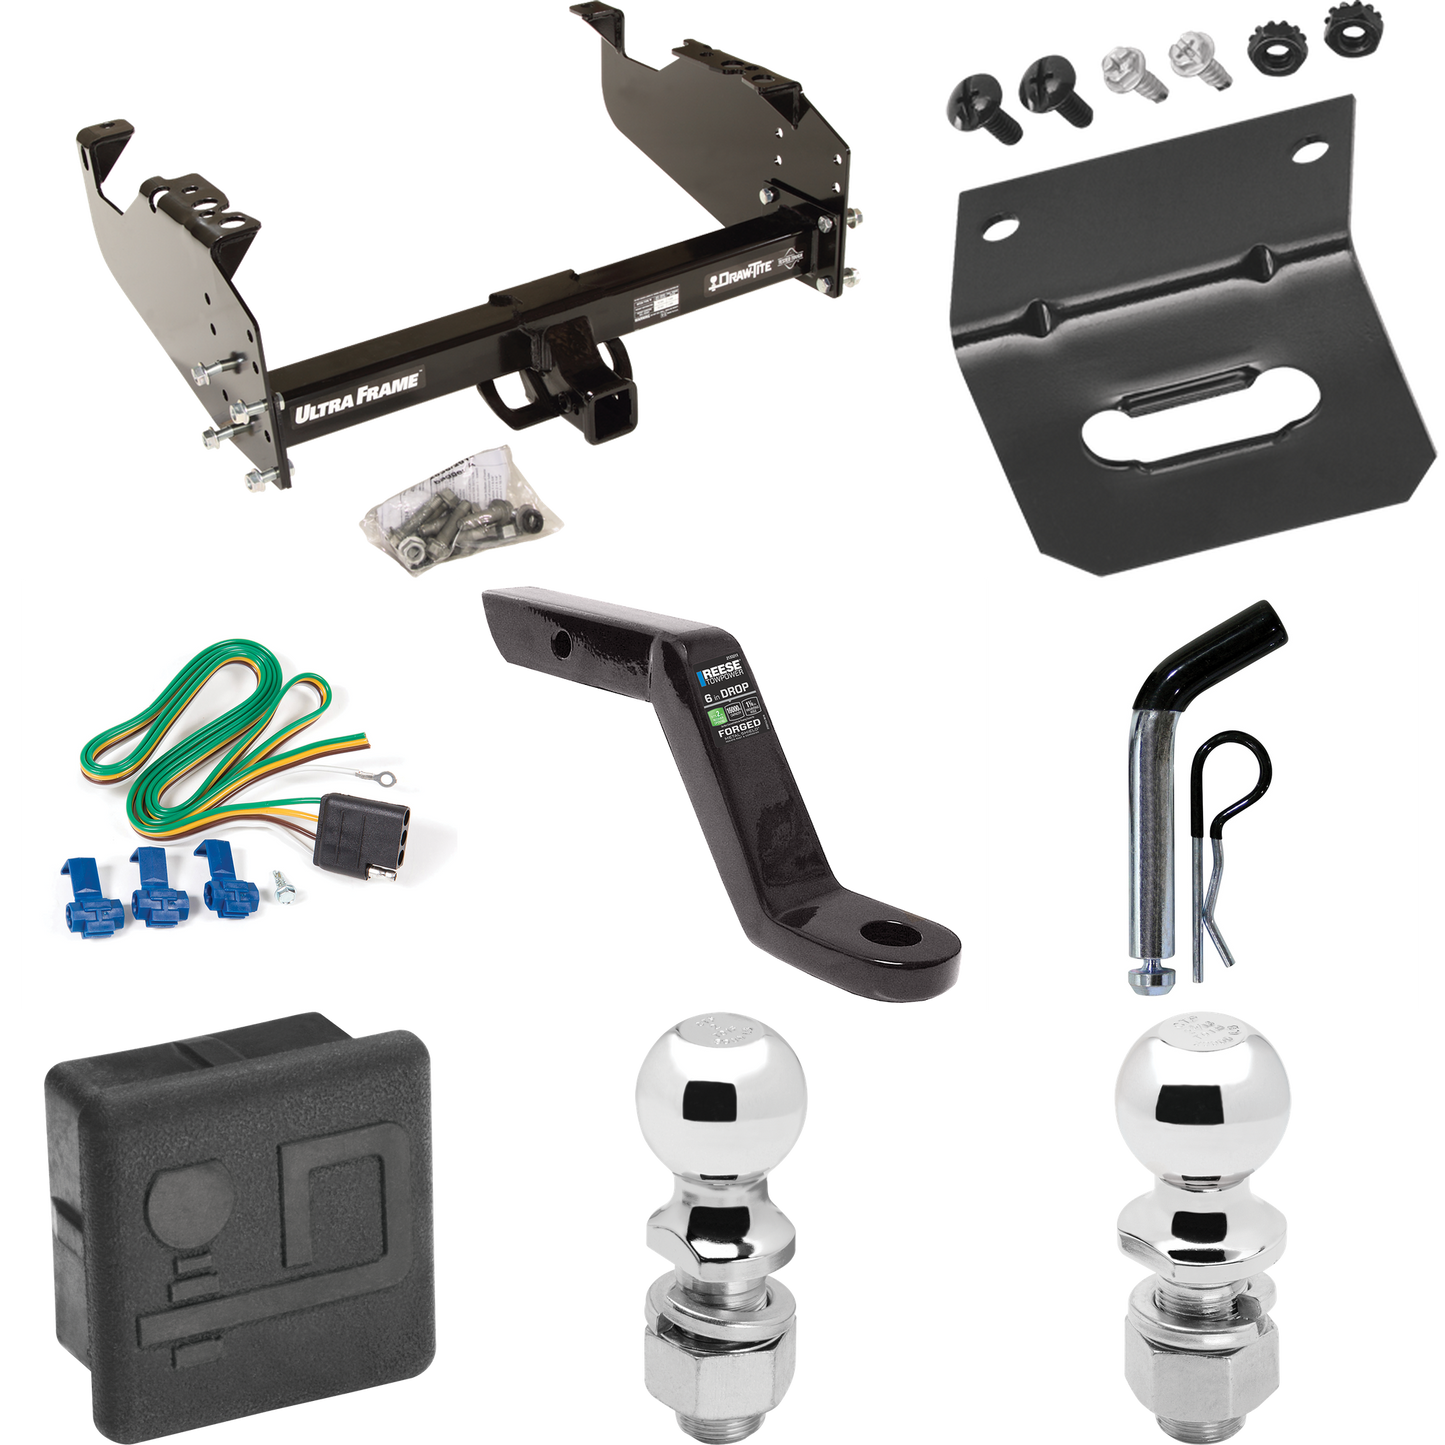 Fits 1963-1965 GMC 1000 Series Trailer Hitch Tow PKG w/ 4-Flat Wiring Harness + Ball Mount w/ 6" Drop + Pin/Clip + 2" Ball + 2-5/16" Ball + Hitch Cover + Wiring Bracket By Draw-Tite